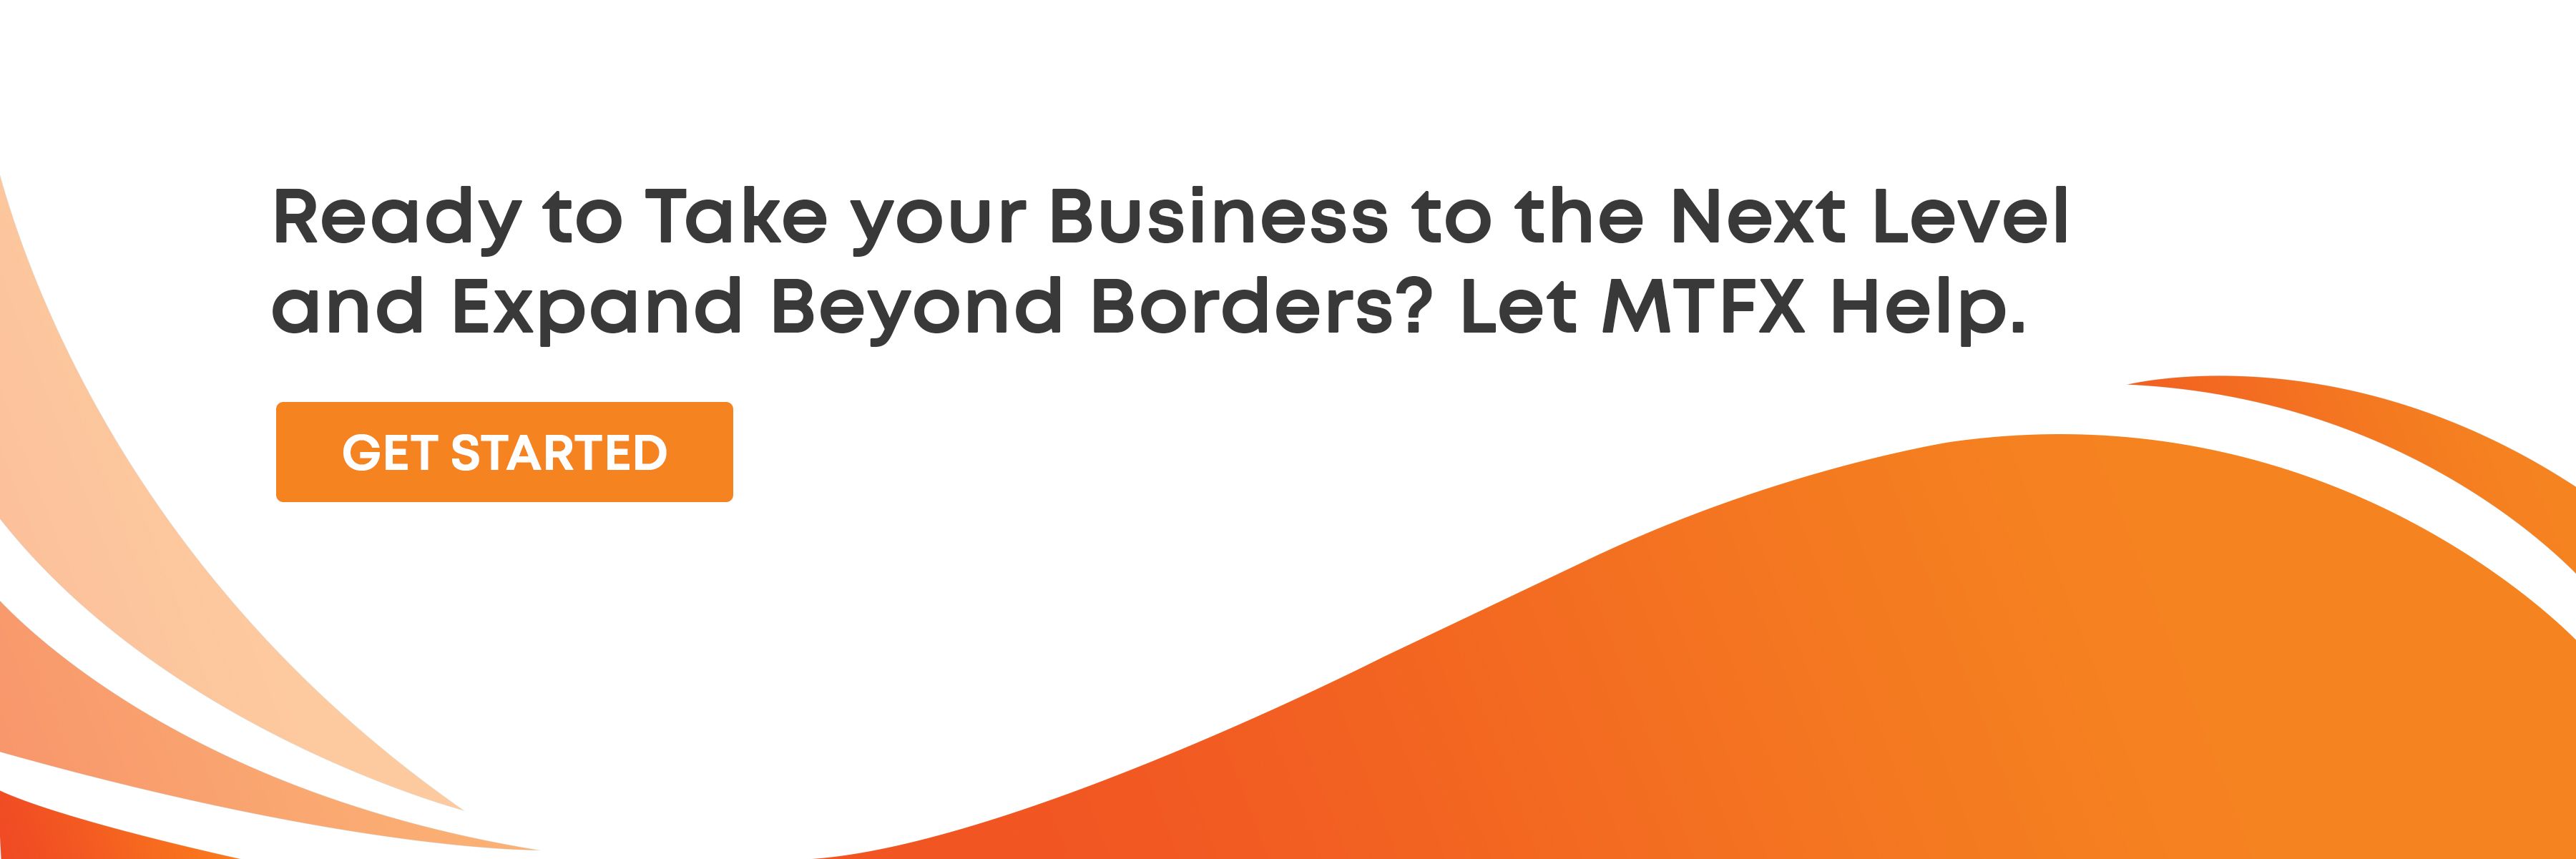 Ready to take your business to the next level and expand beyond borders?